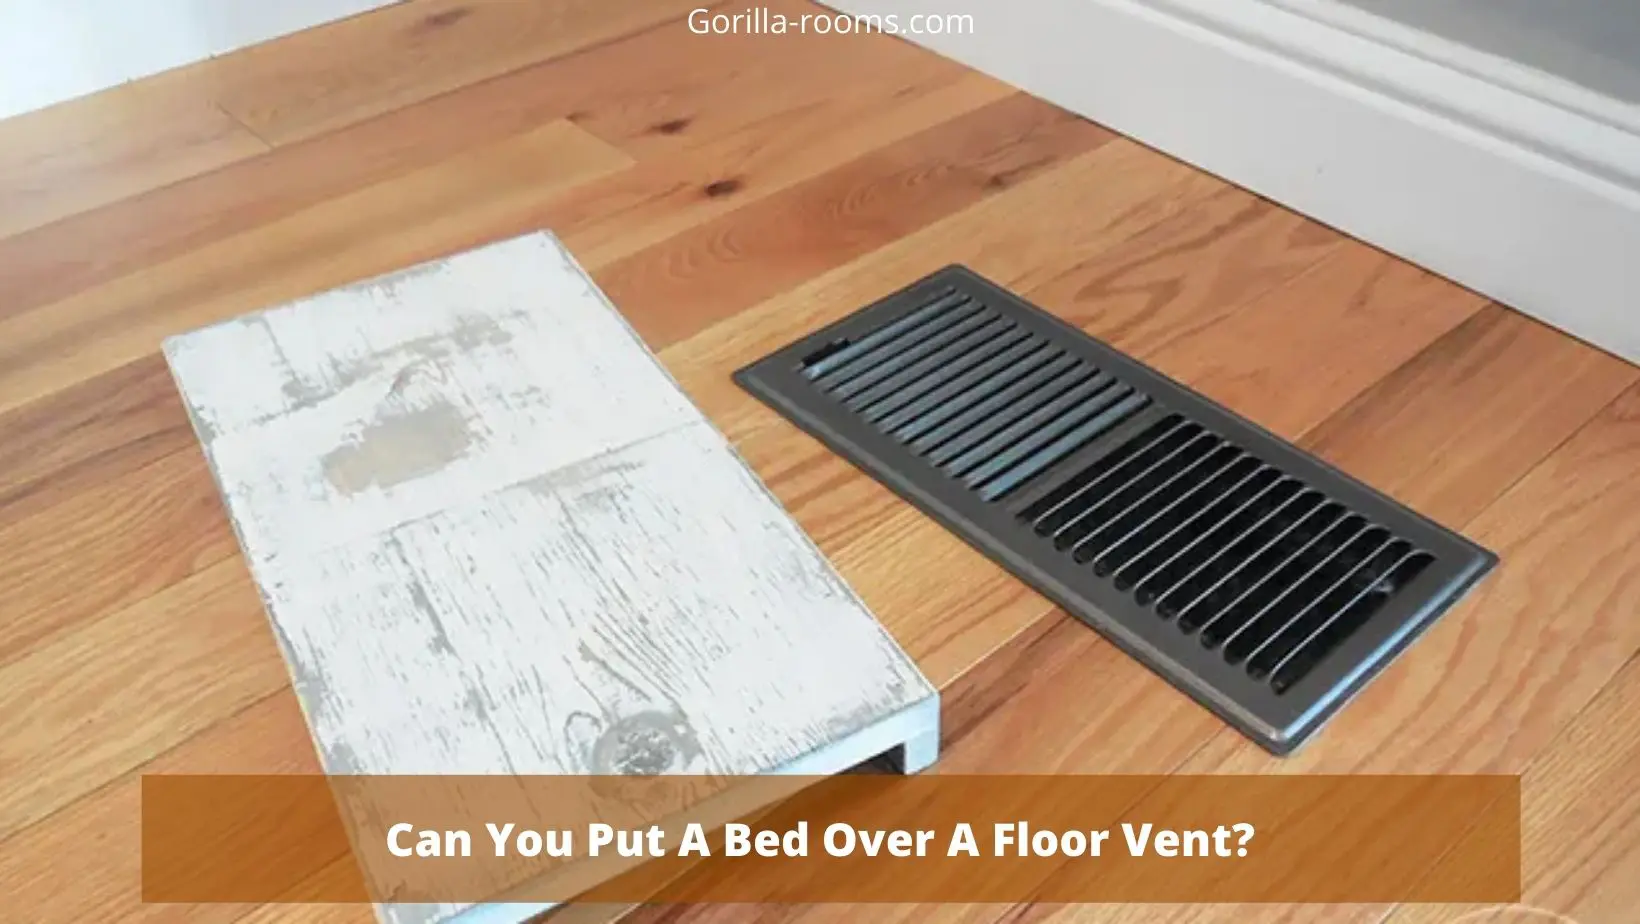 Can You Put A Bed Over A Floor Vent?